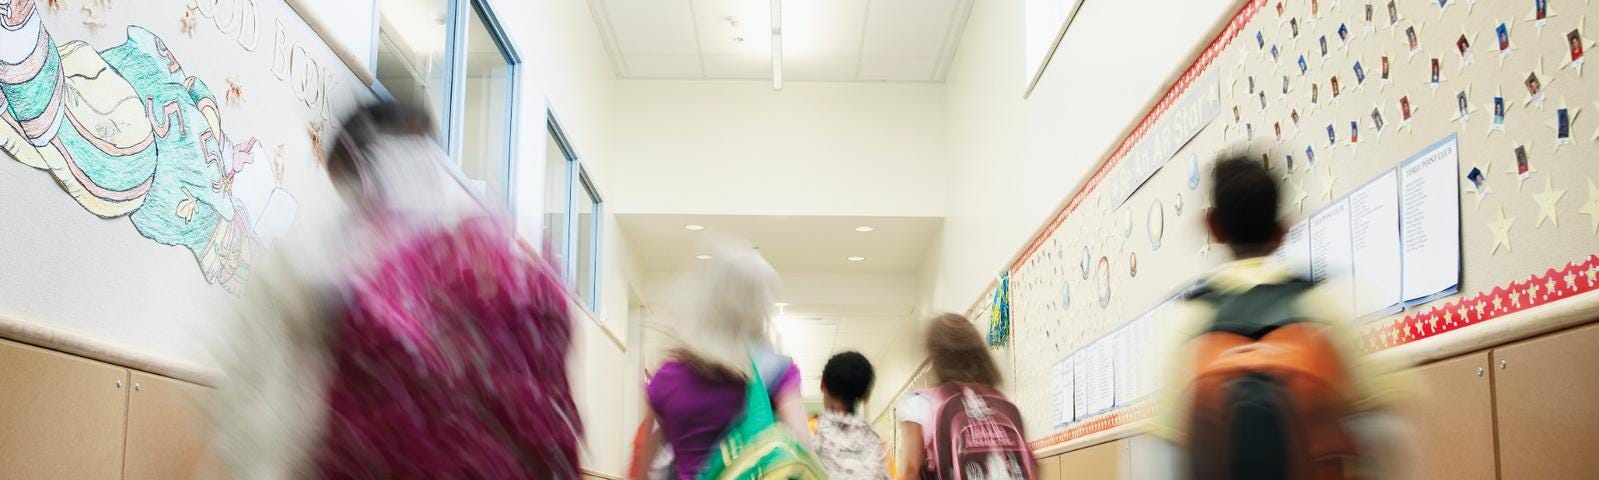 School hallway with blurred students walking away from the camera. Photo by Thomas Barwick/Getty Images